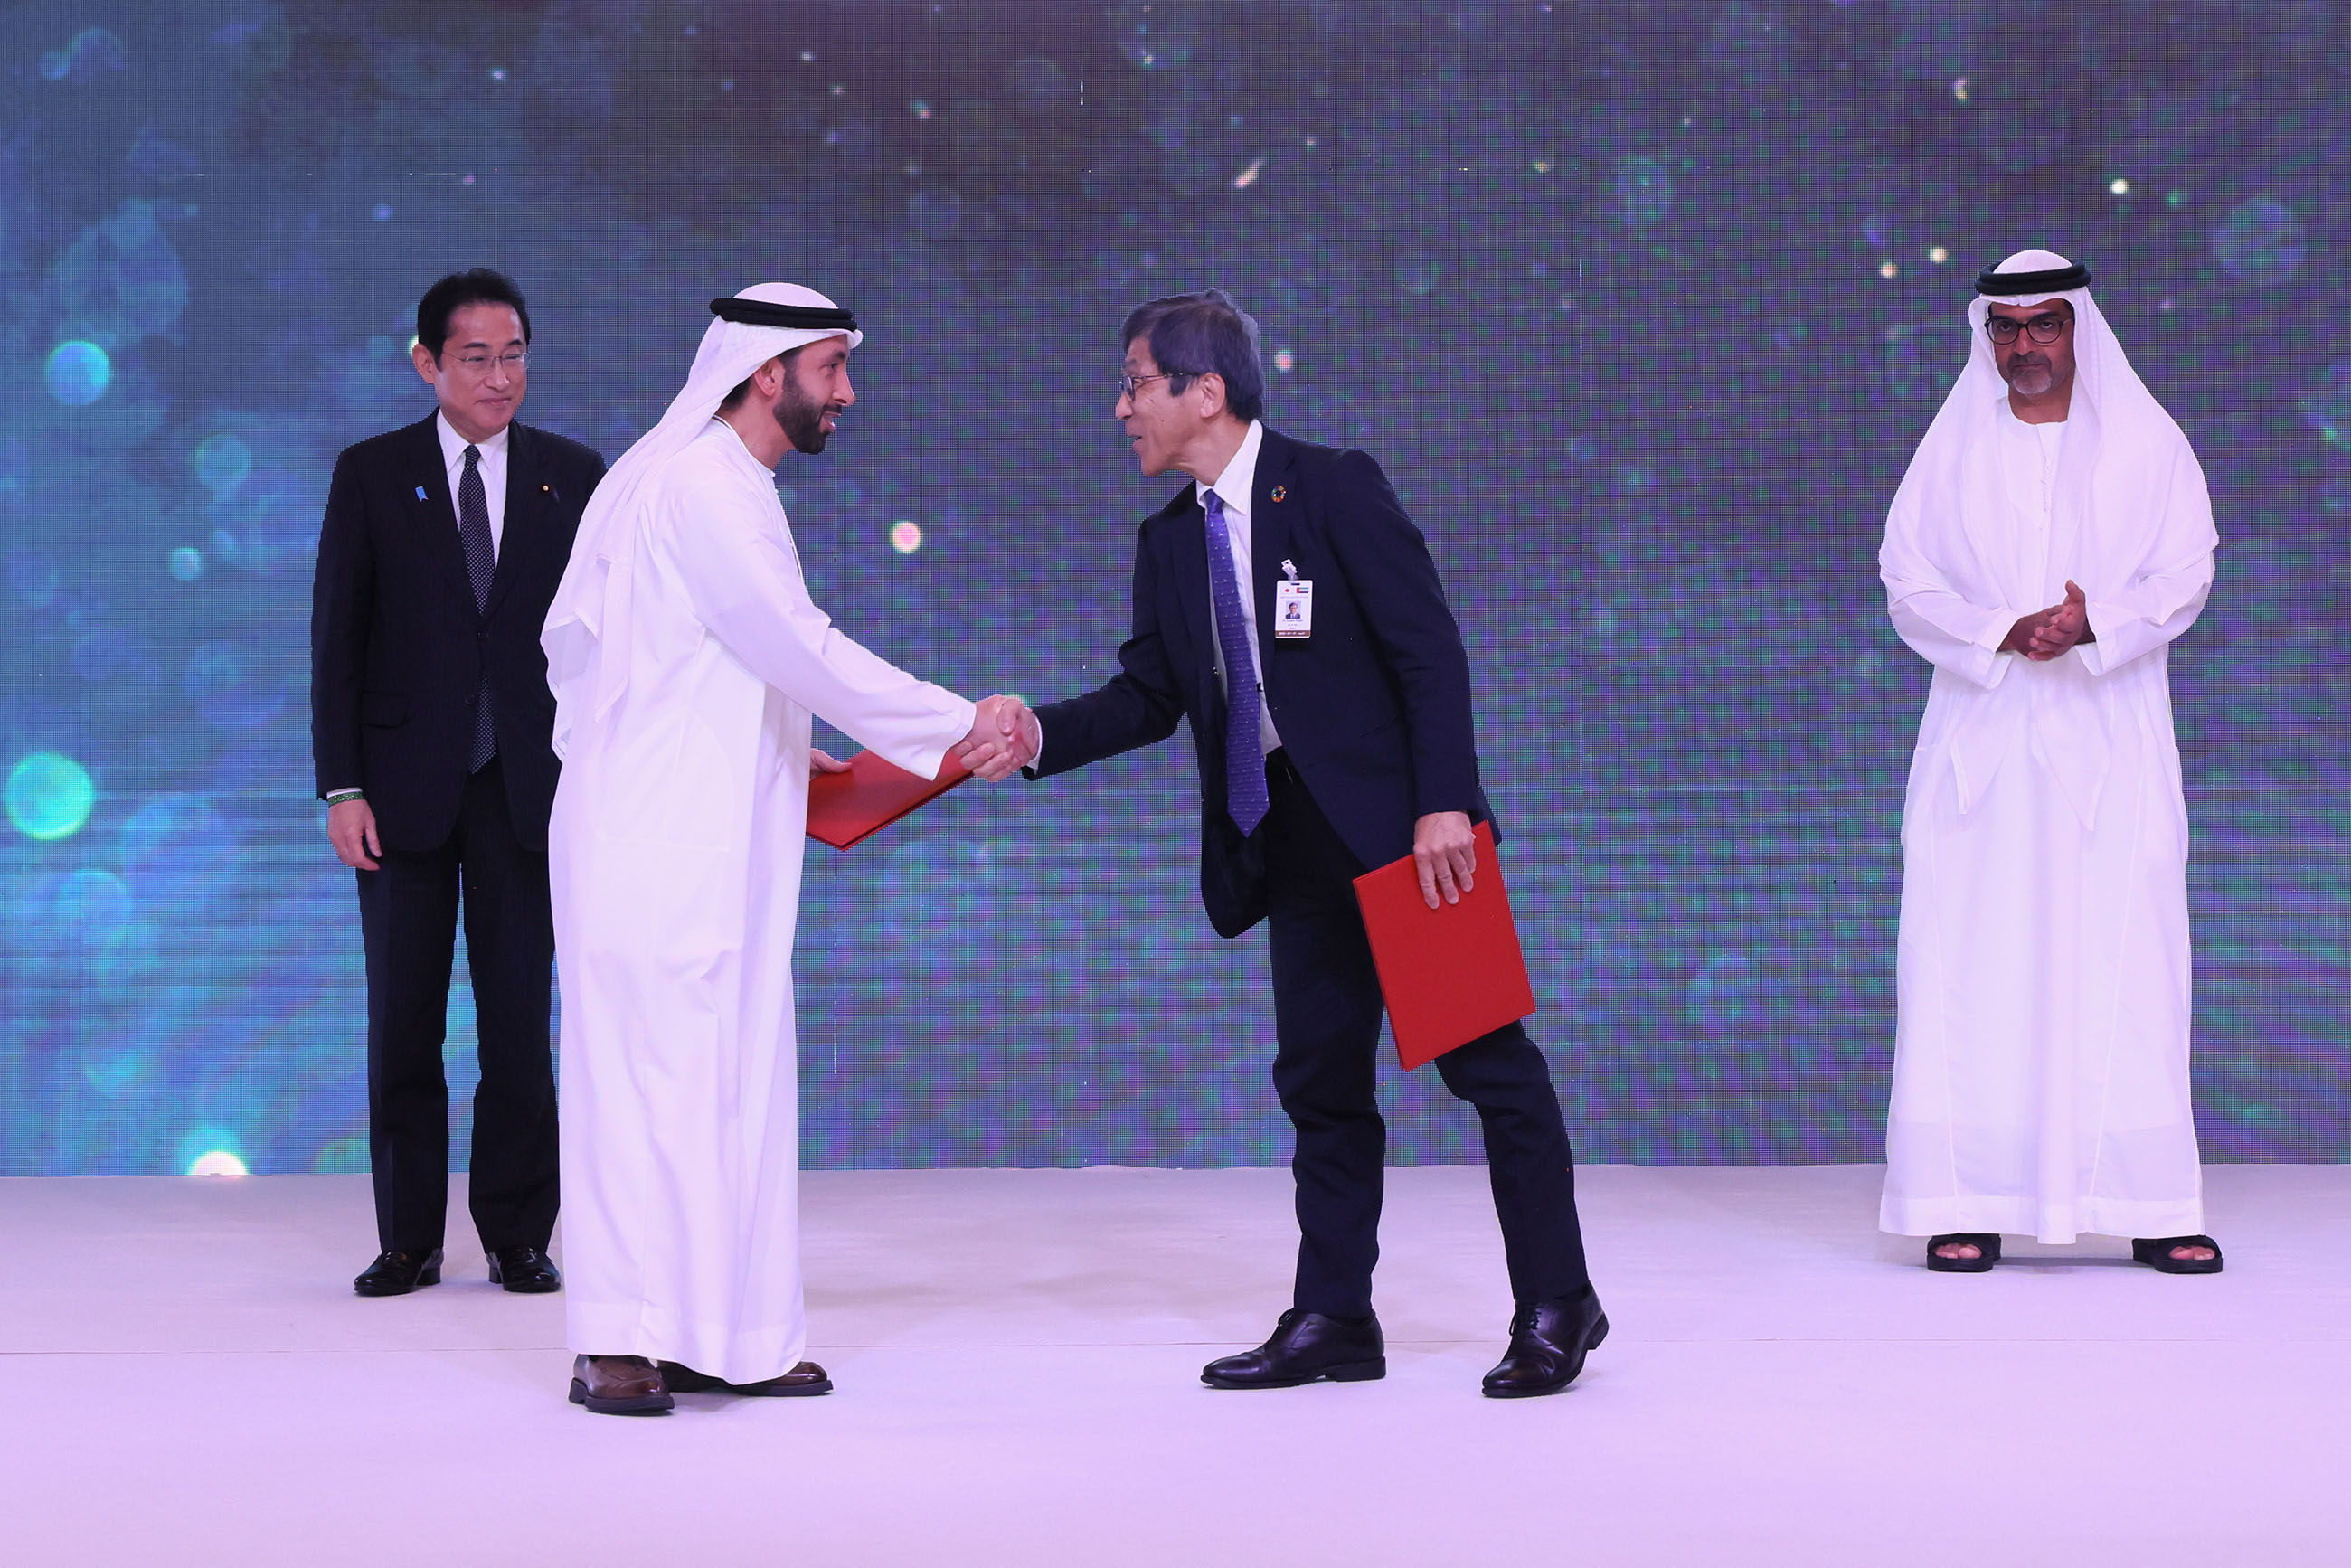 Ceremony to exchange documents at the Japan-UAE Business Forum (18)